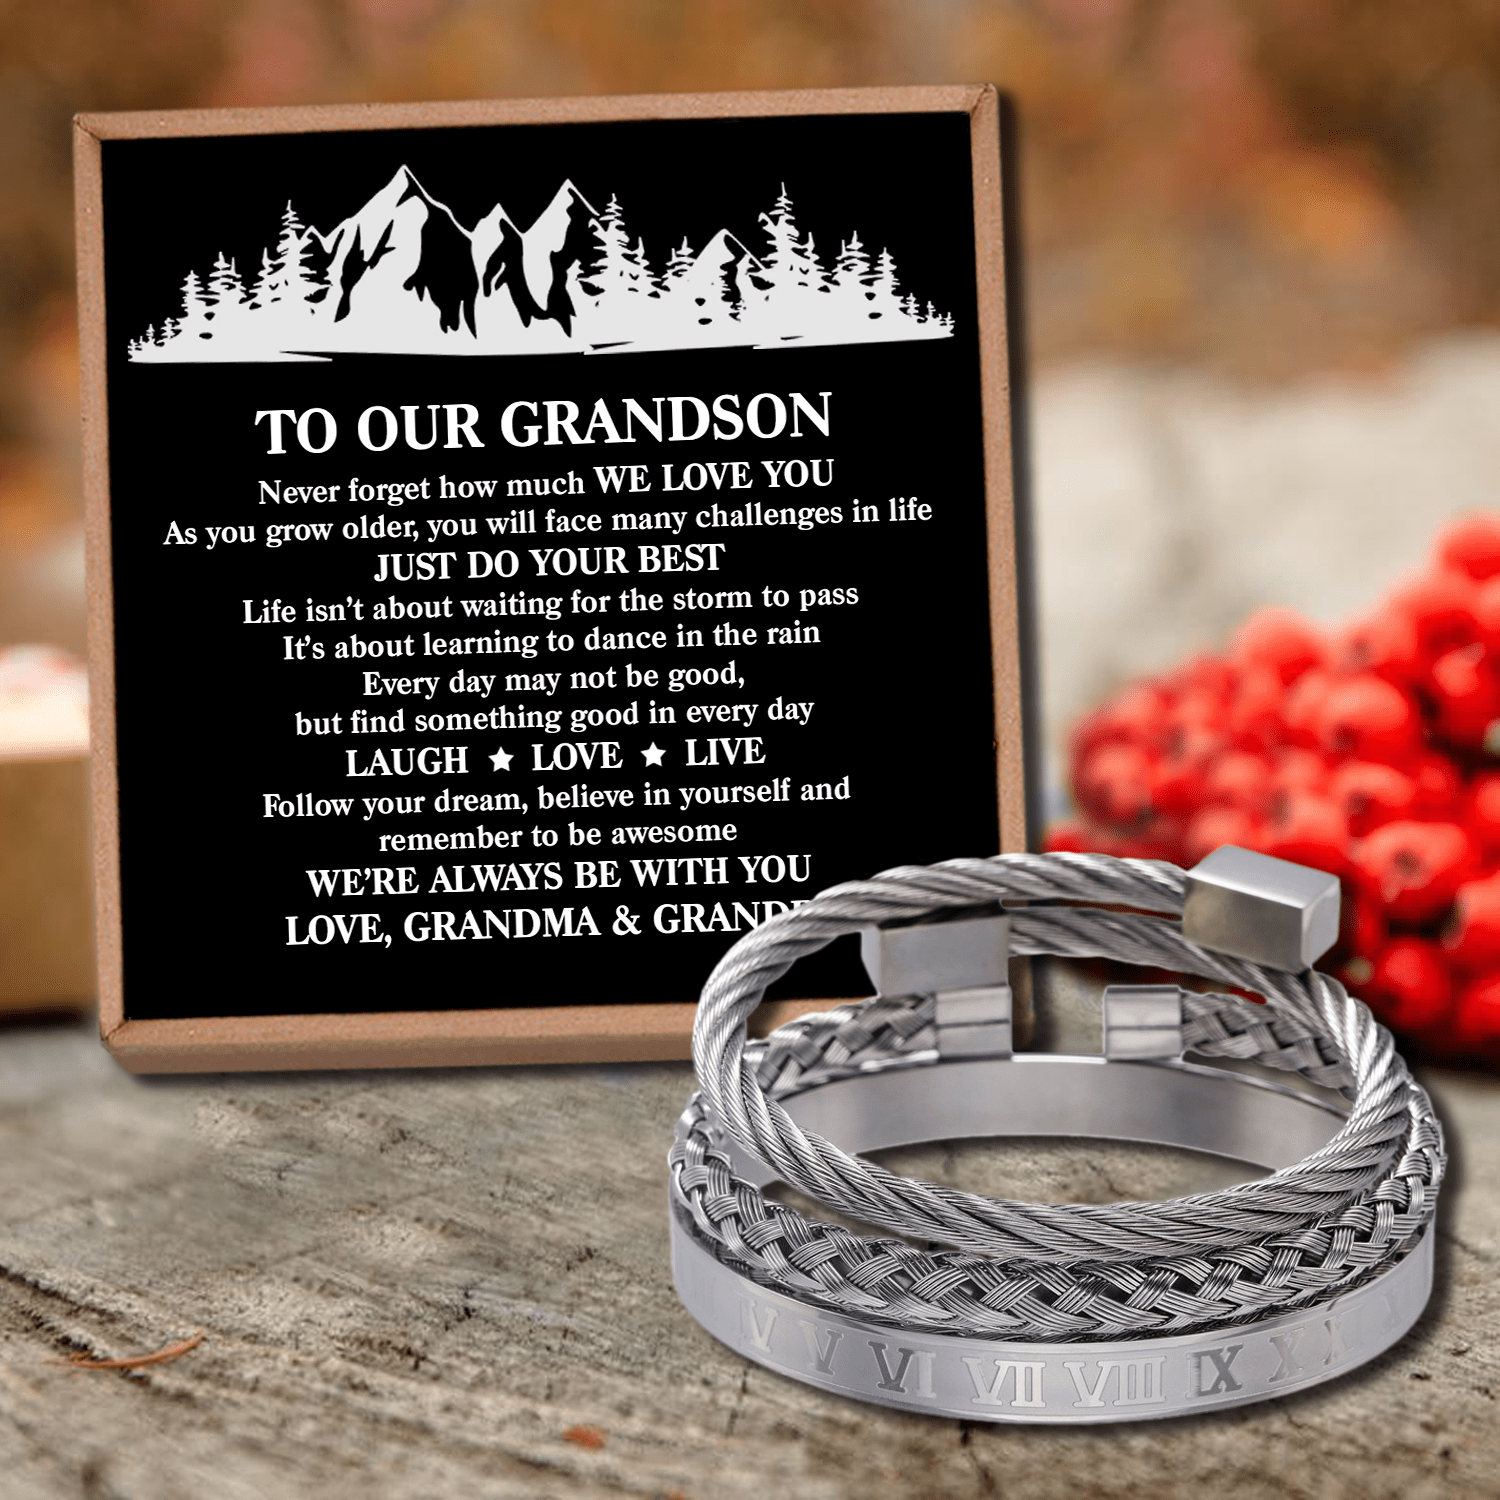 Bracelets To Our Grandson - Just Do Your Best Roman Numeral Bracelet Set Silver GiveMe-Gifts